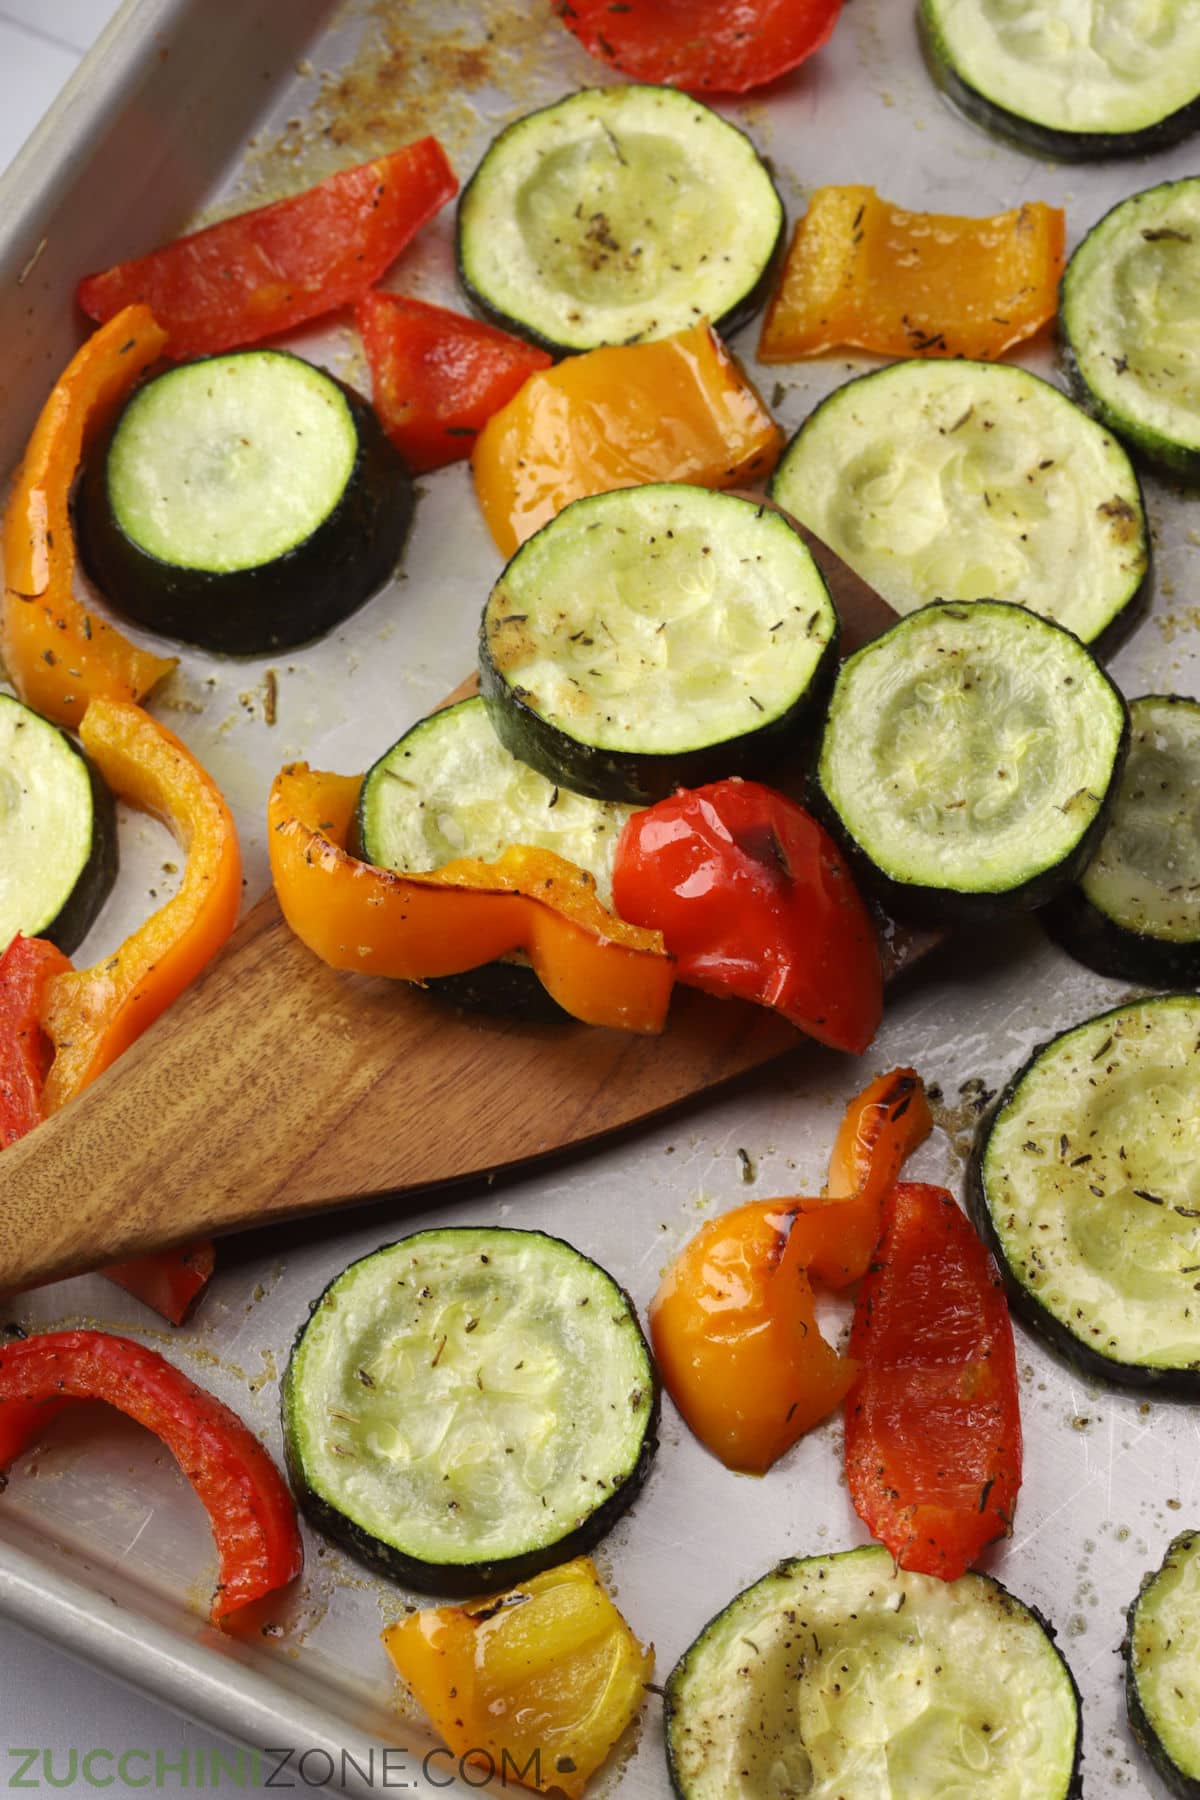 Wooden spatula scooping zucchini and peppers from a sheet pan.